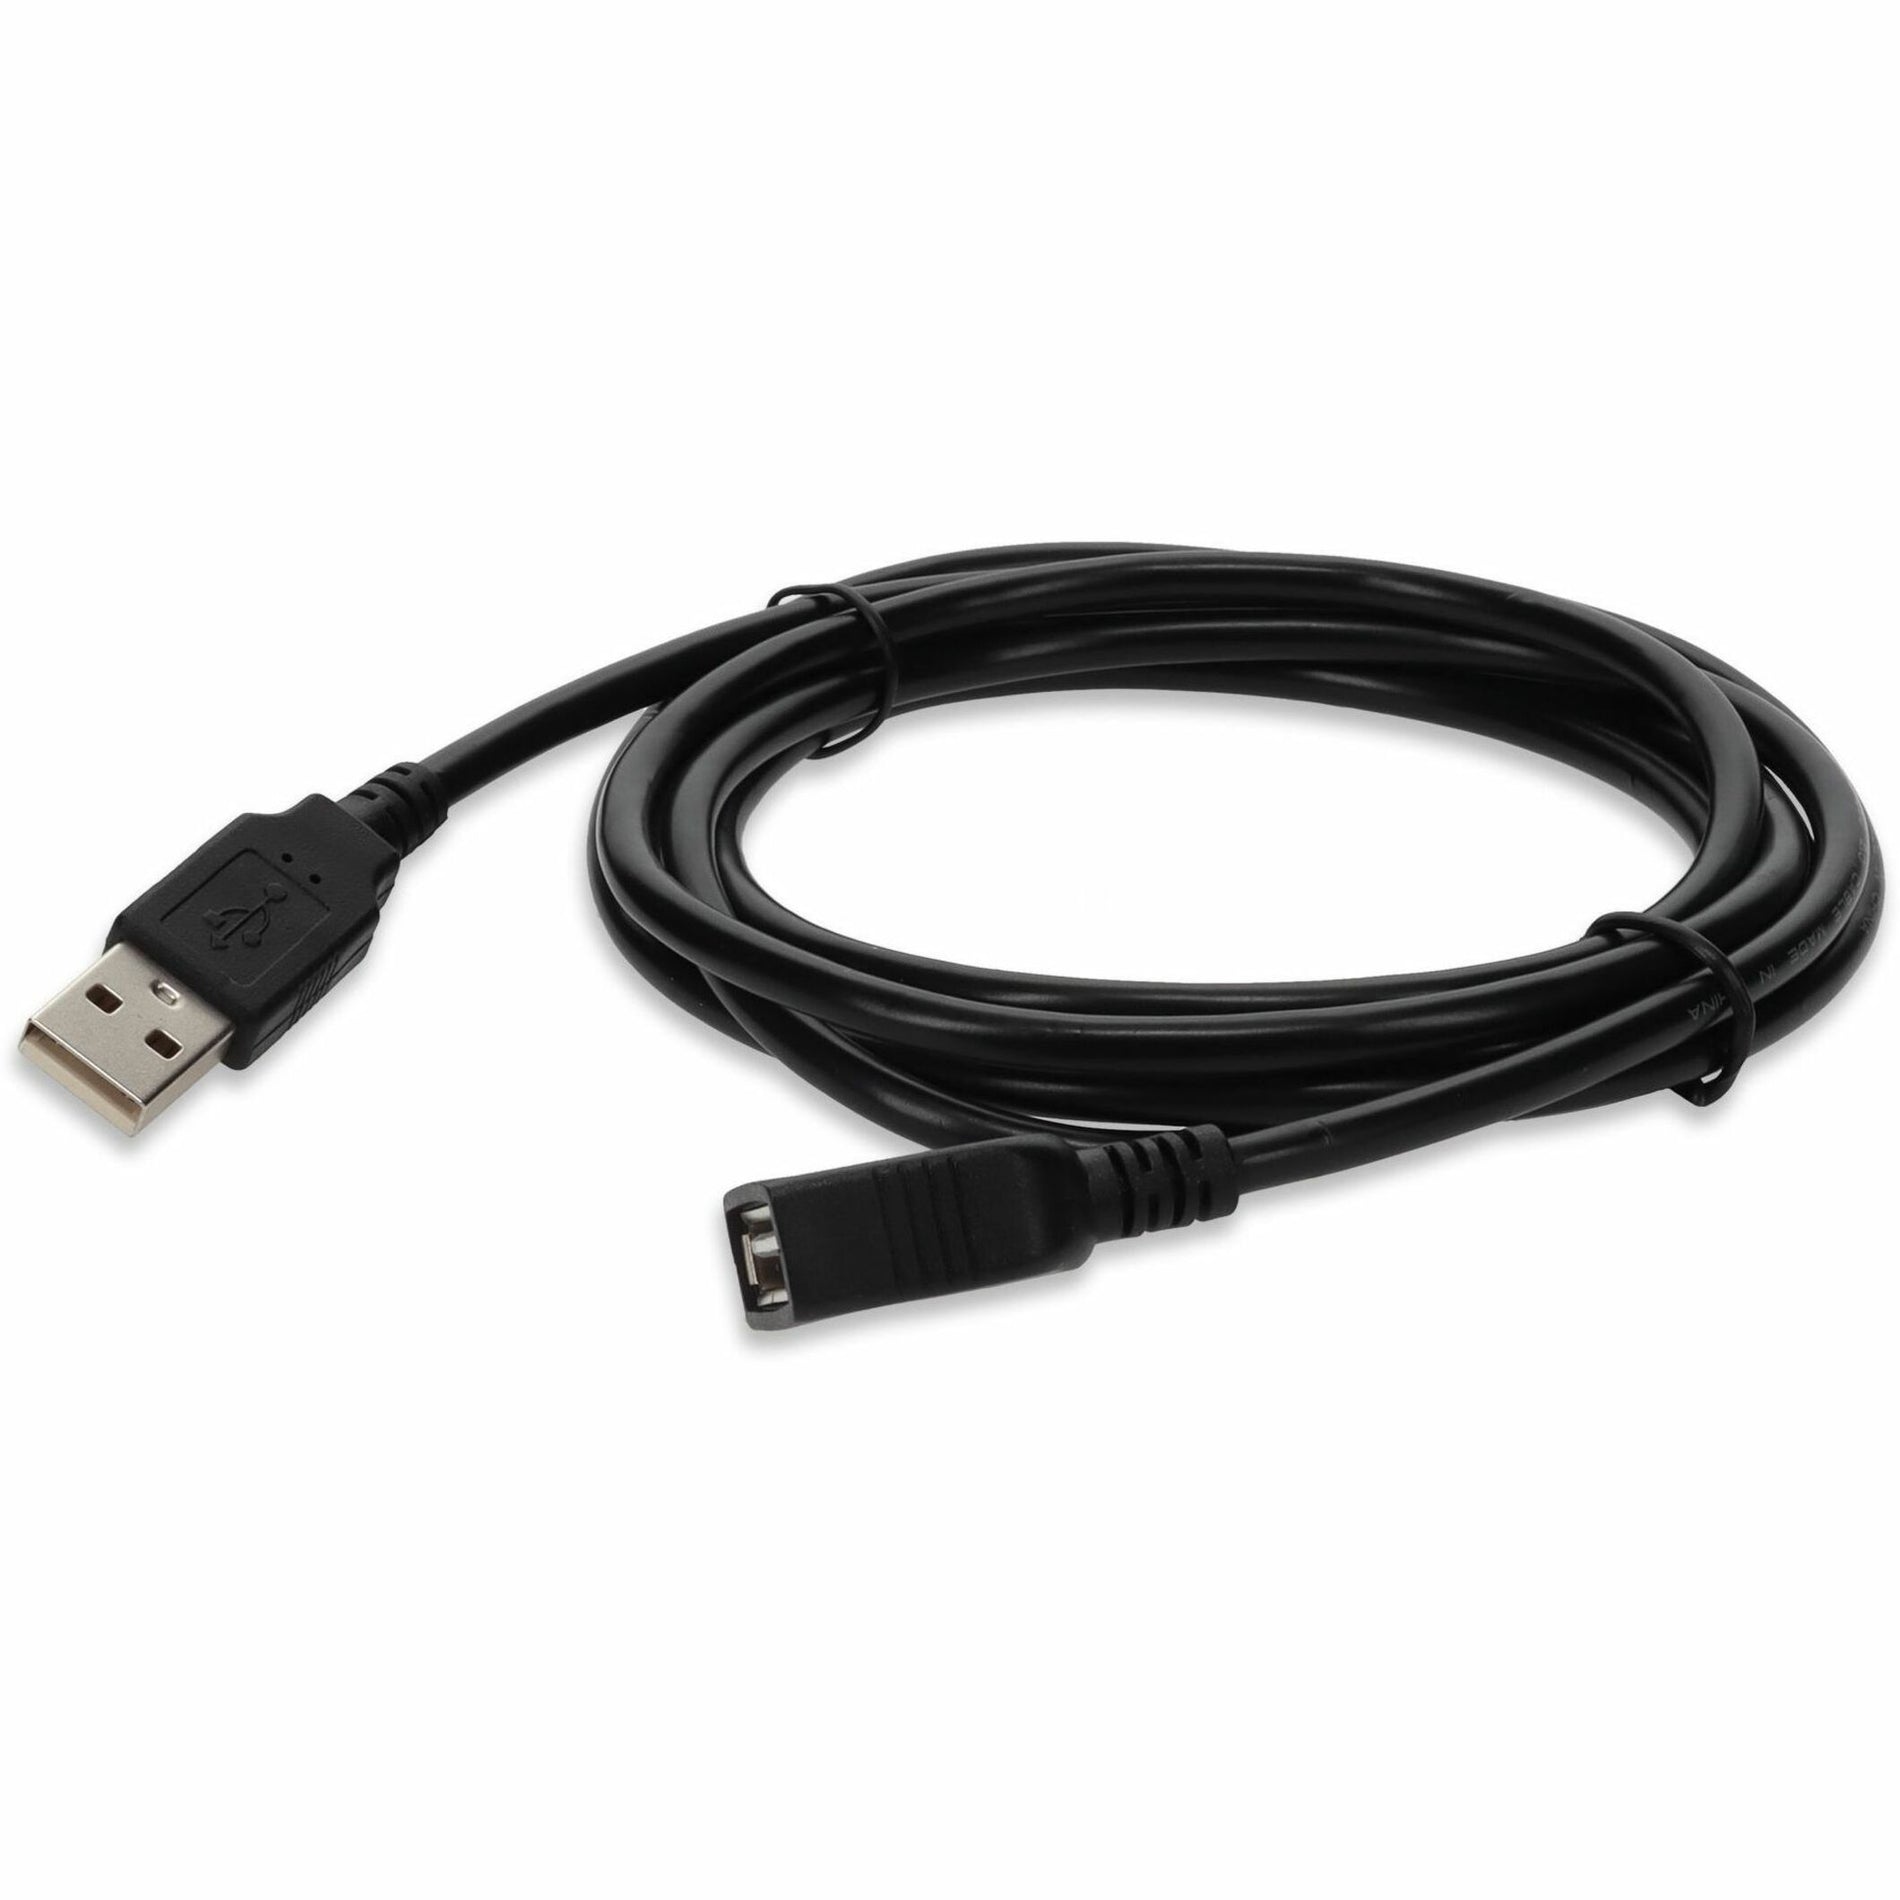 AddOn USBEXTAA15 15ft USB 2.0 A to A Active Extension Cable - M/F, 15ft Black Cable